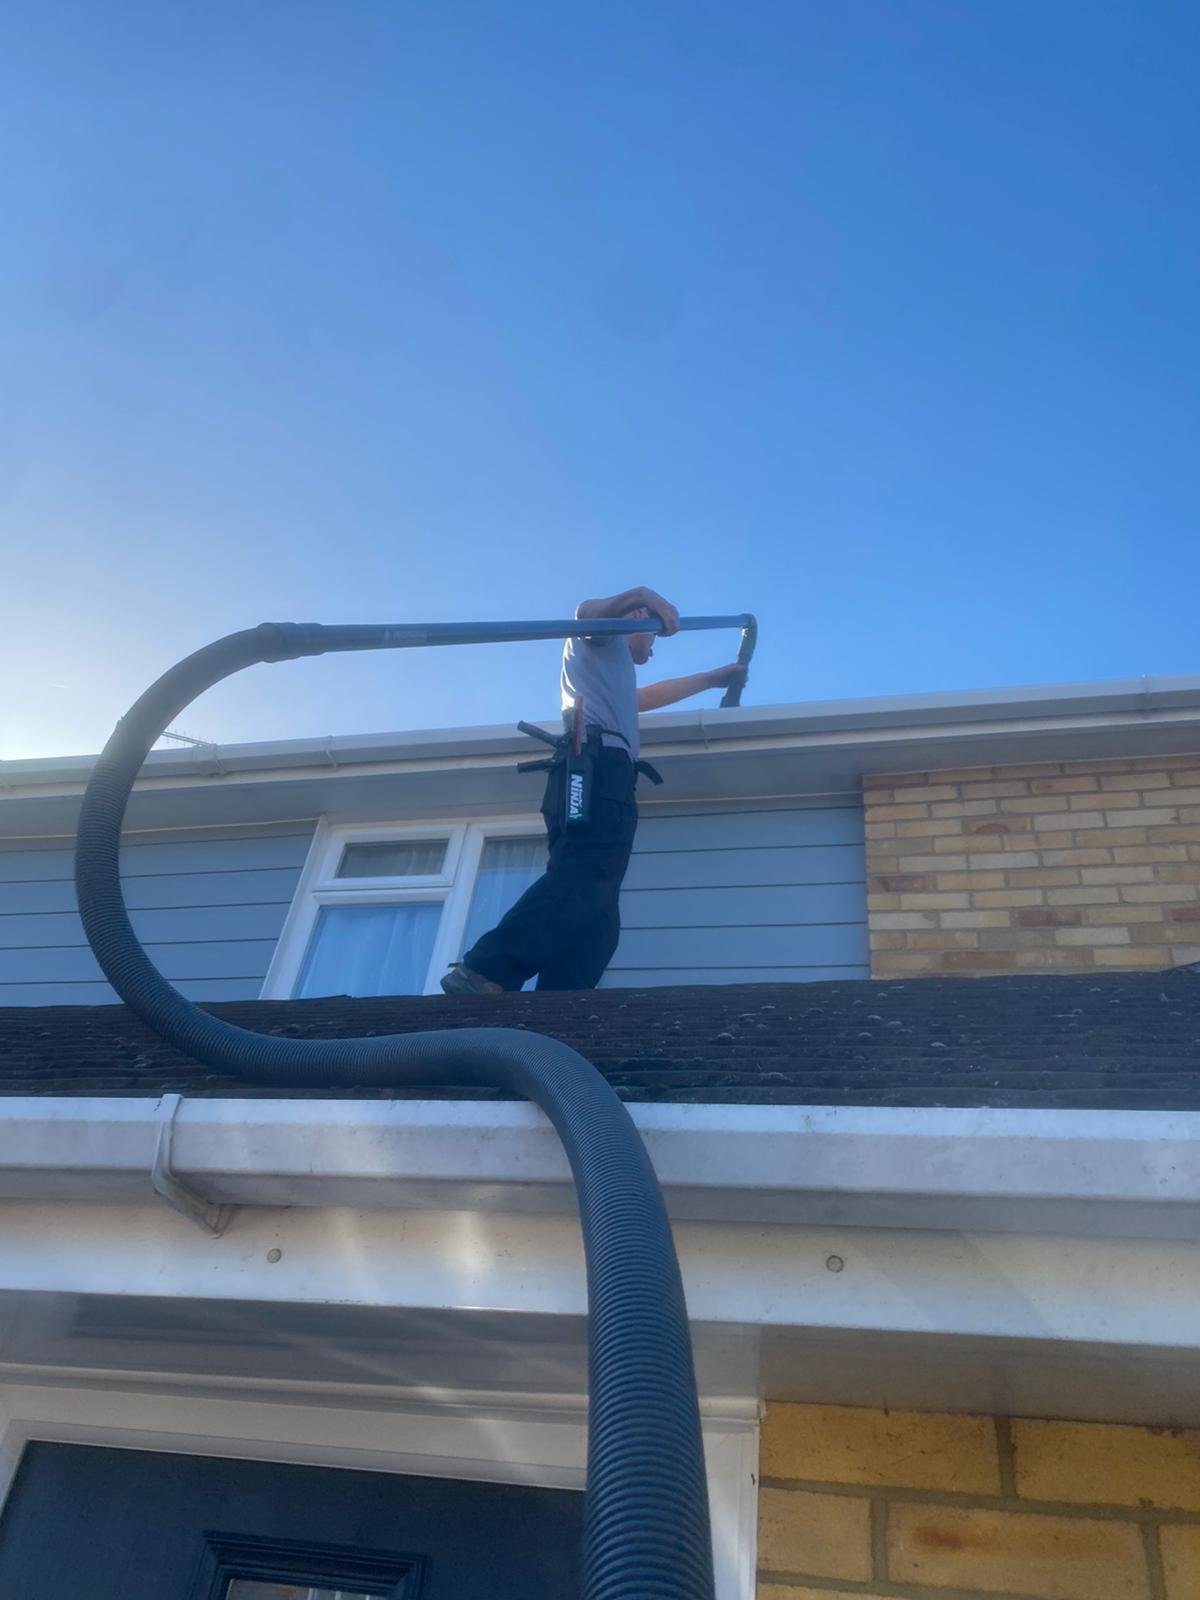 Gutter vac being used from a flat roof